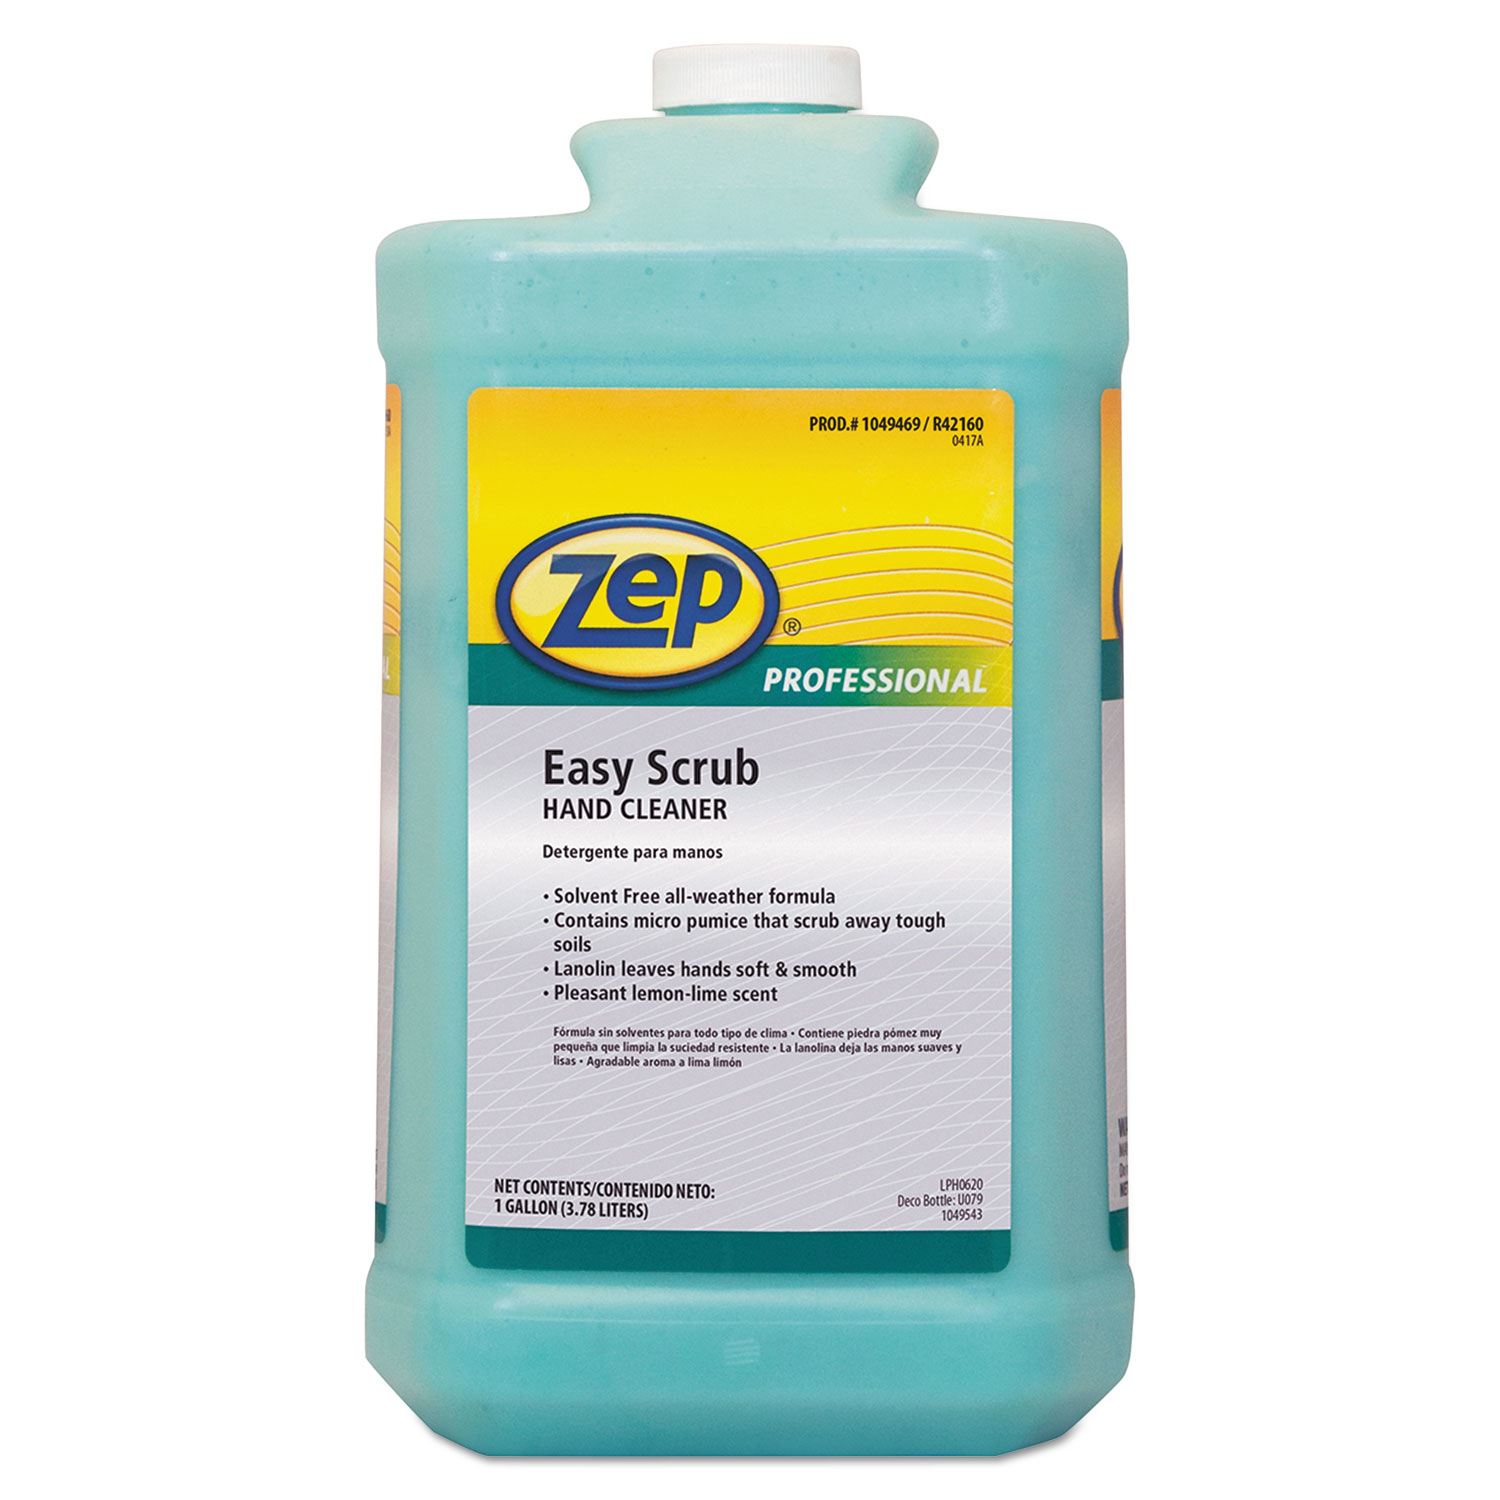  Zep Professional 1049469 Industrial Hand Cleaner, Easy Scrub, 1 gal Bottle, 4/Carton (ZPP1049469) 